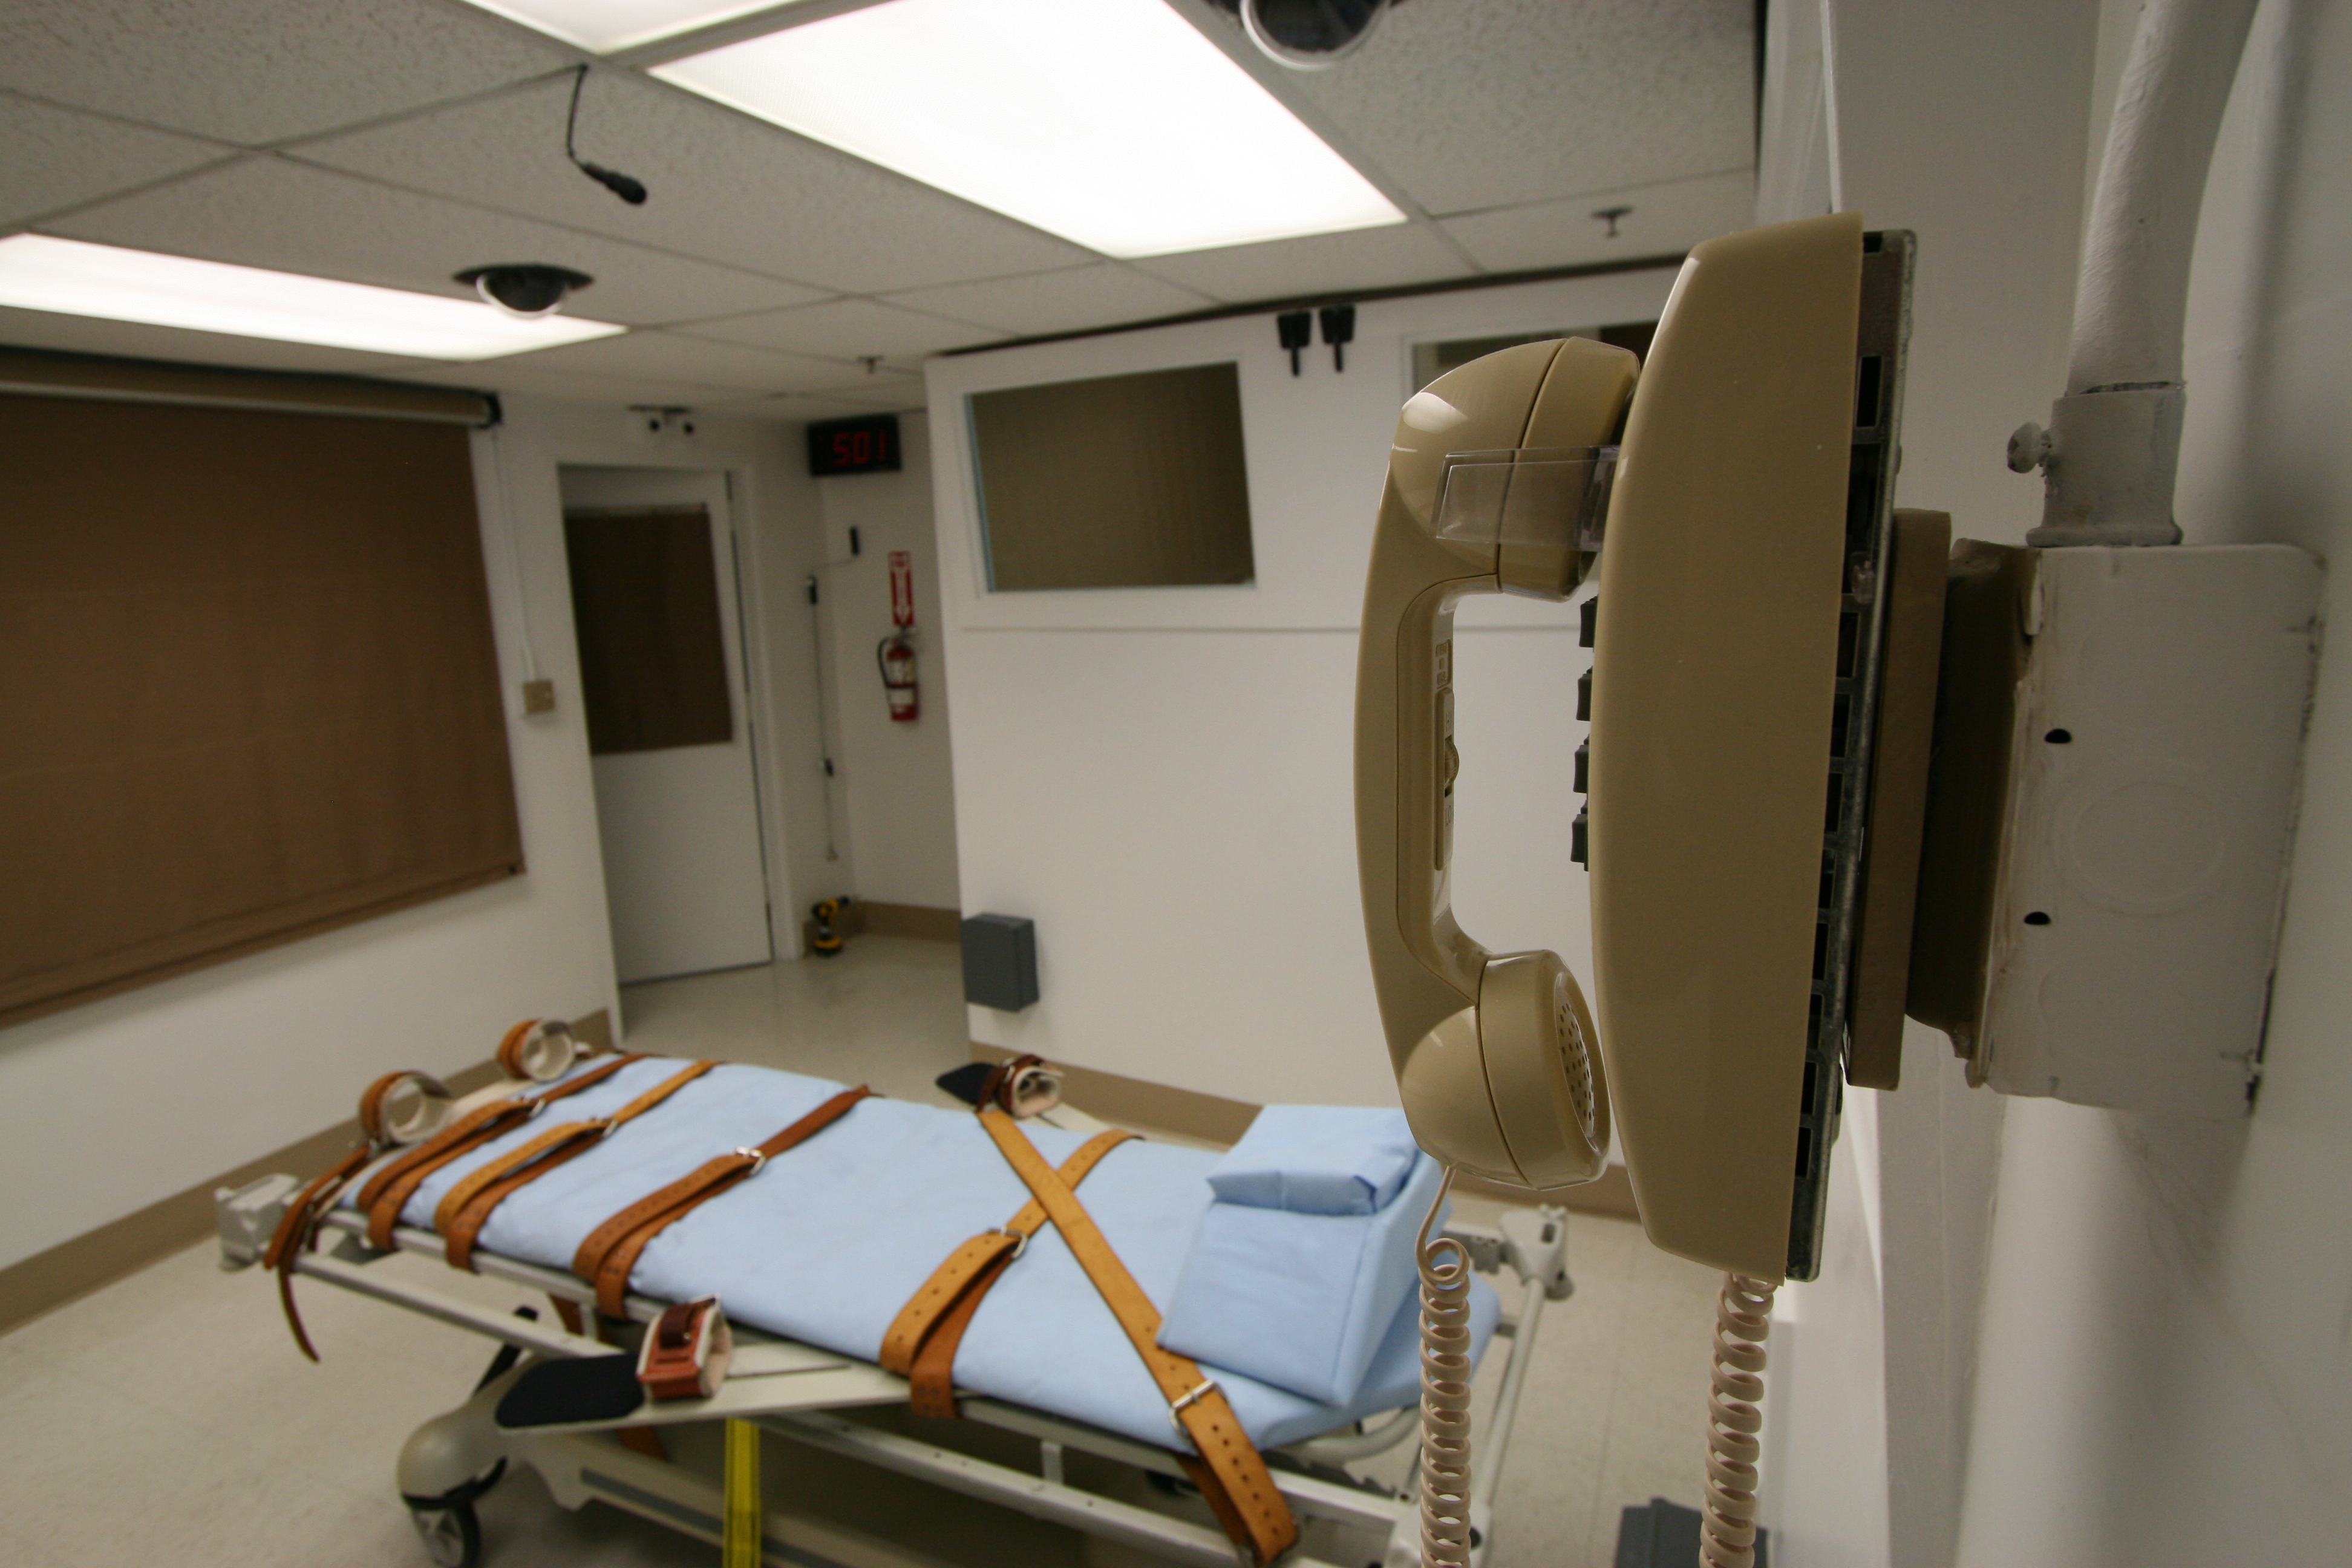 New death penalty ruling perpetuates injustice